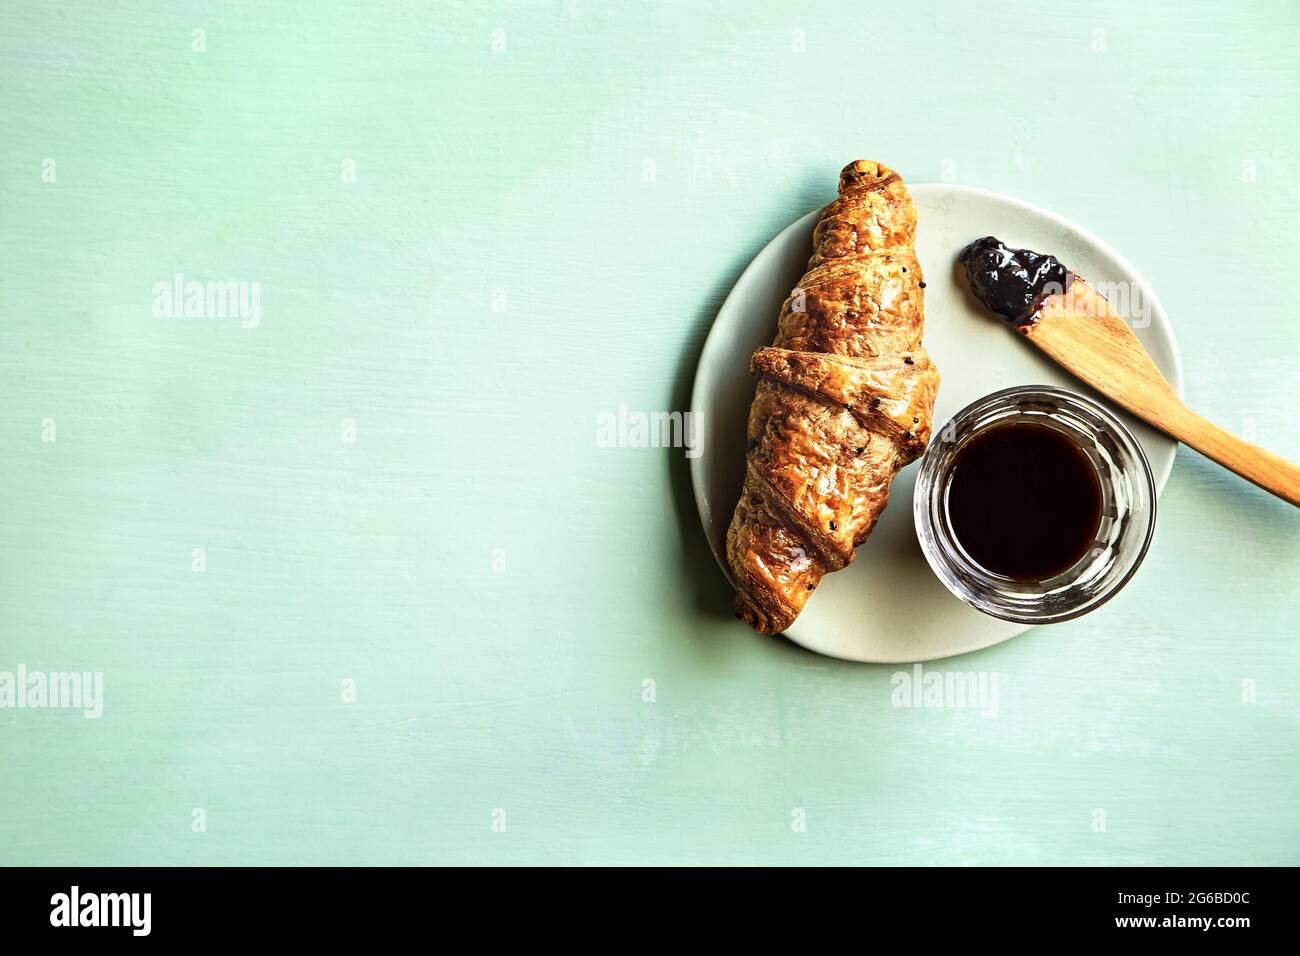 Buttery Croissant with Jam and a glass of Black Coffee Stock Photo